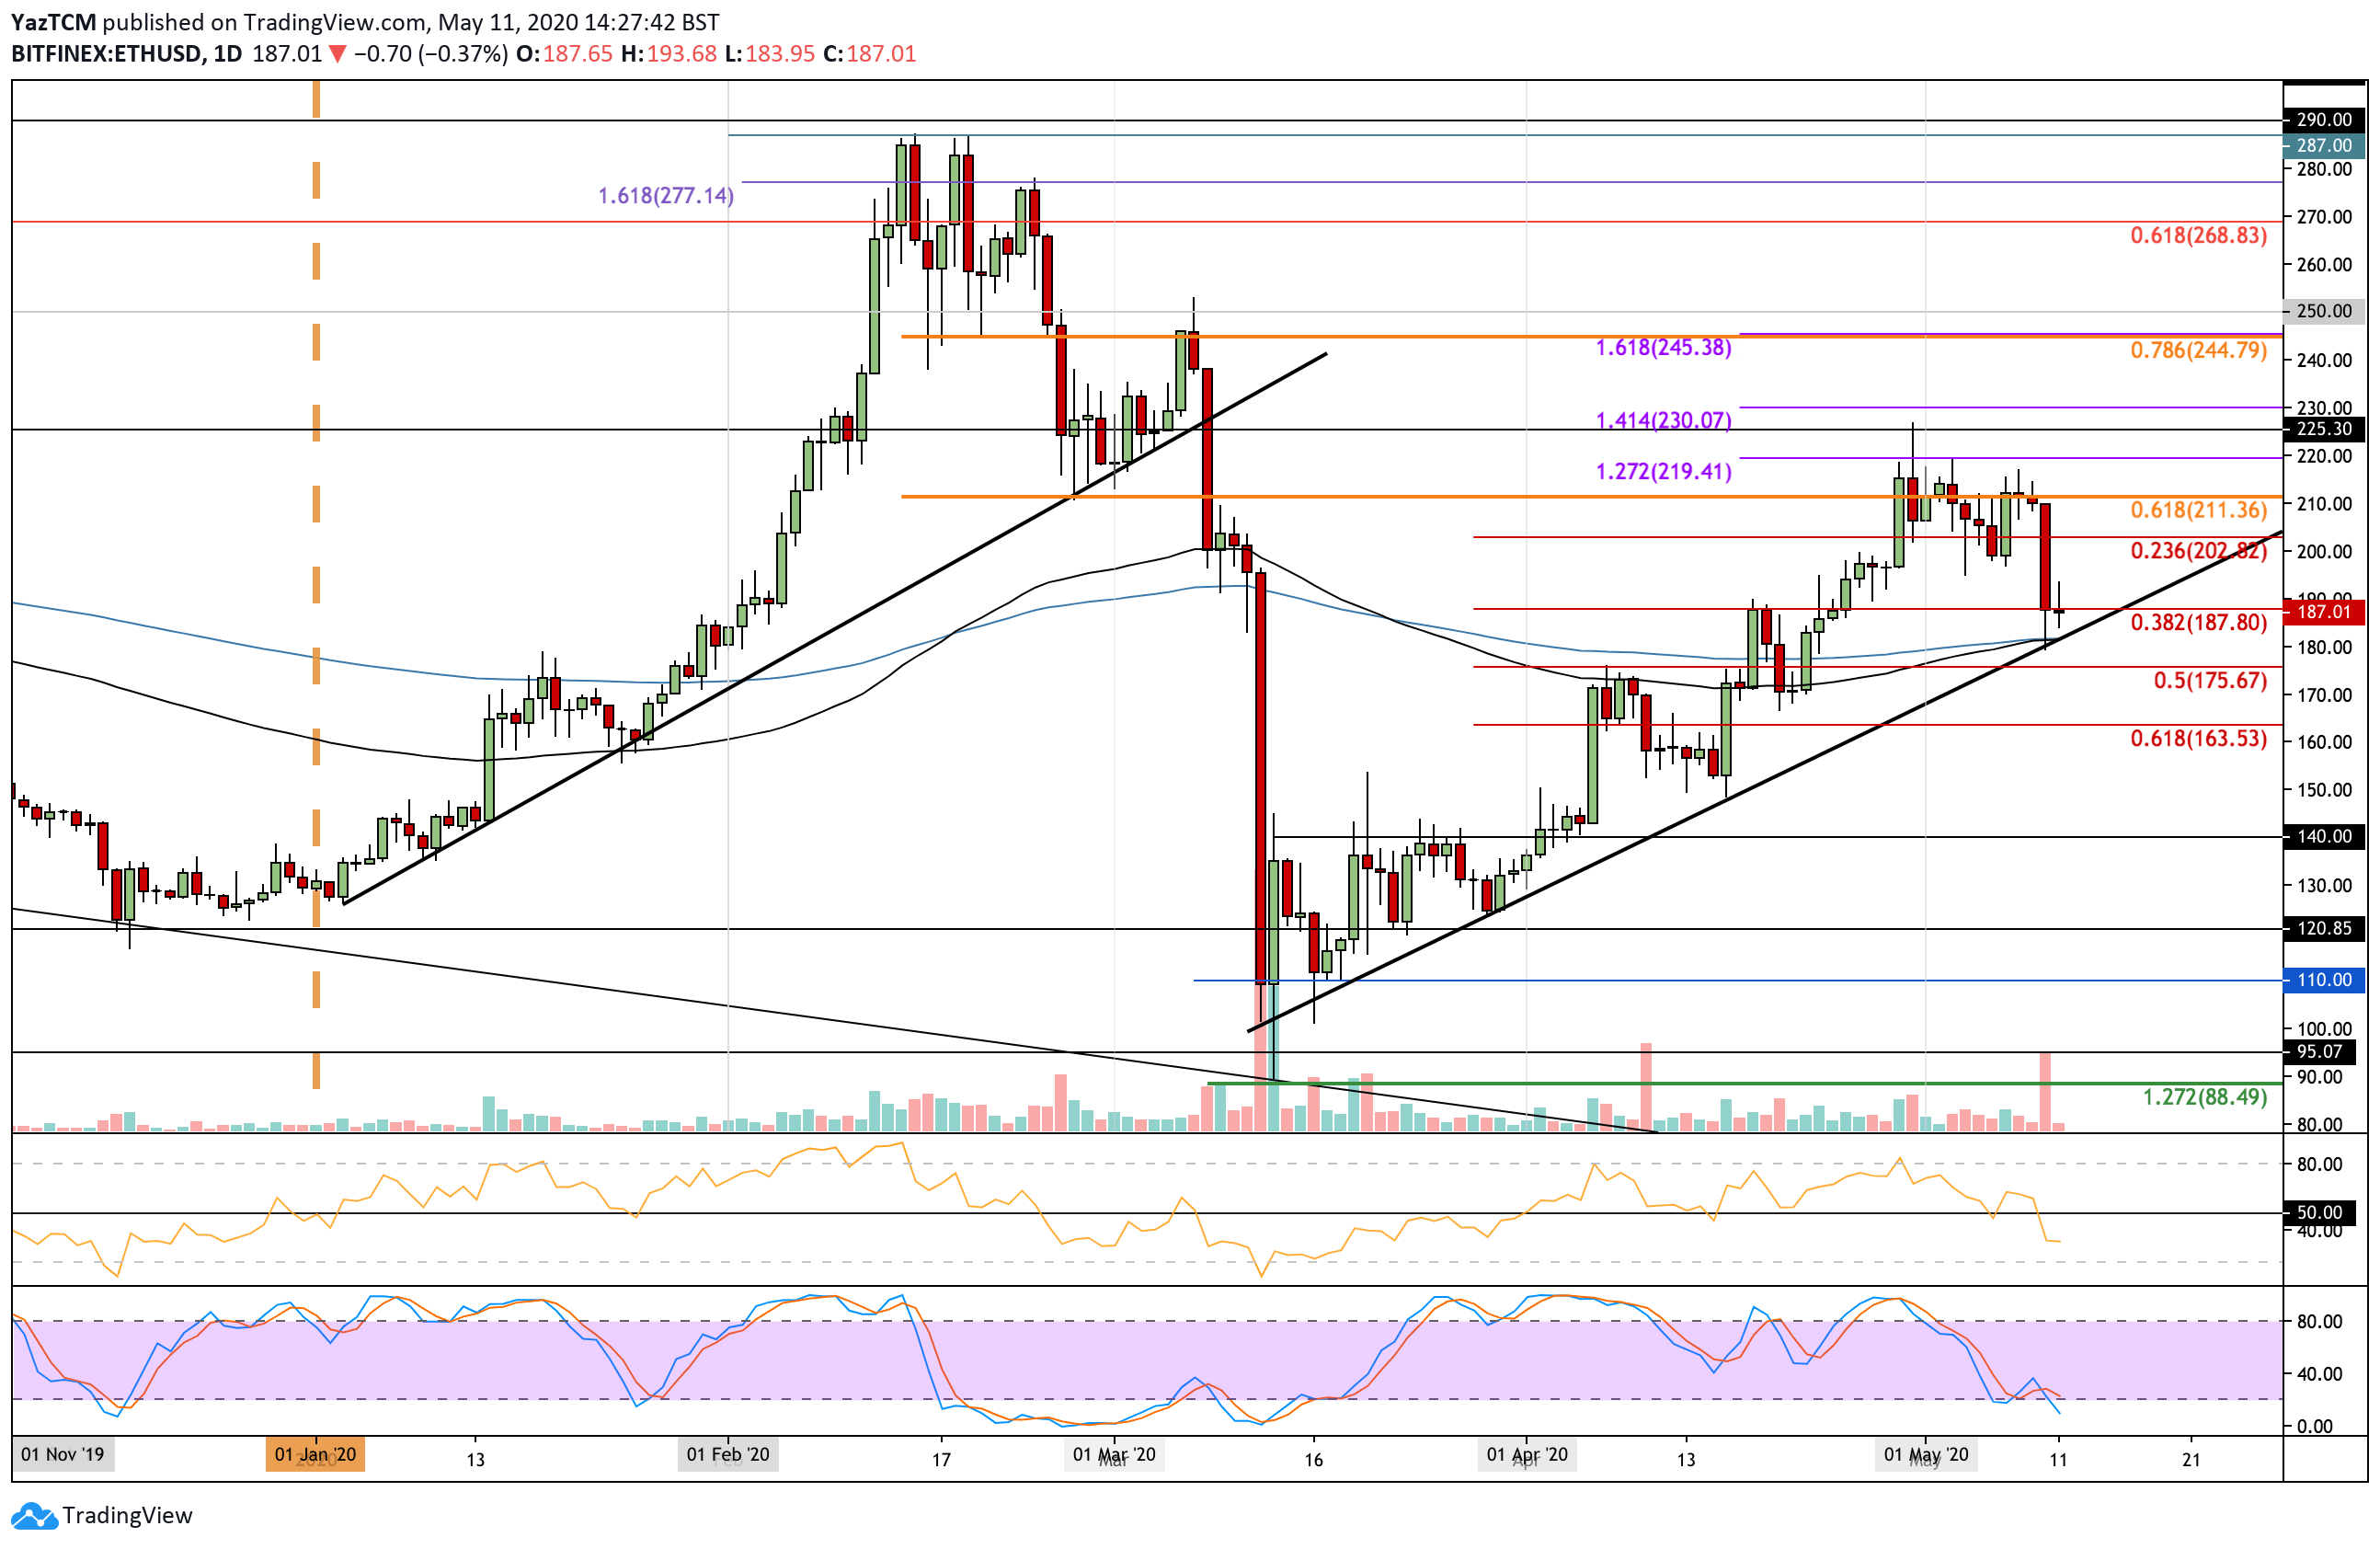 Ethereum Price Analysis: Long-Term Support Reached, But ETH In Danger After Losing The $200 Mark